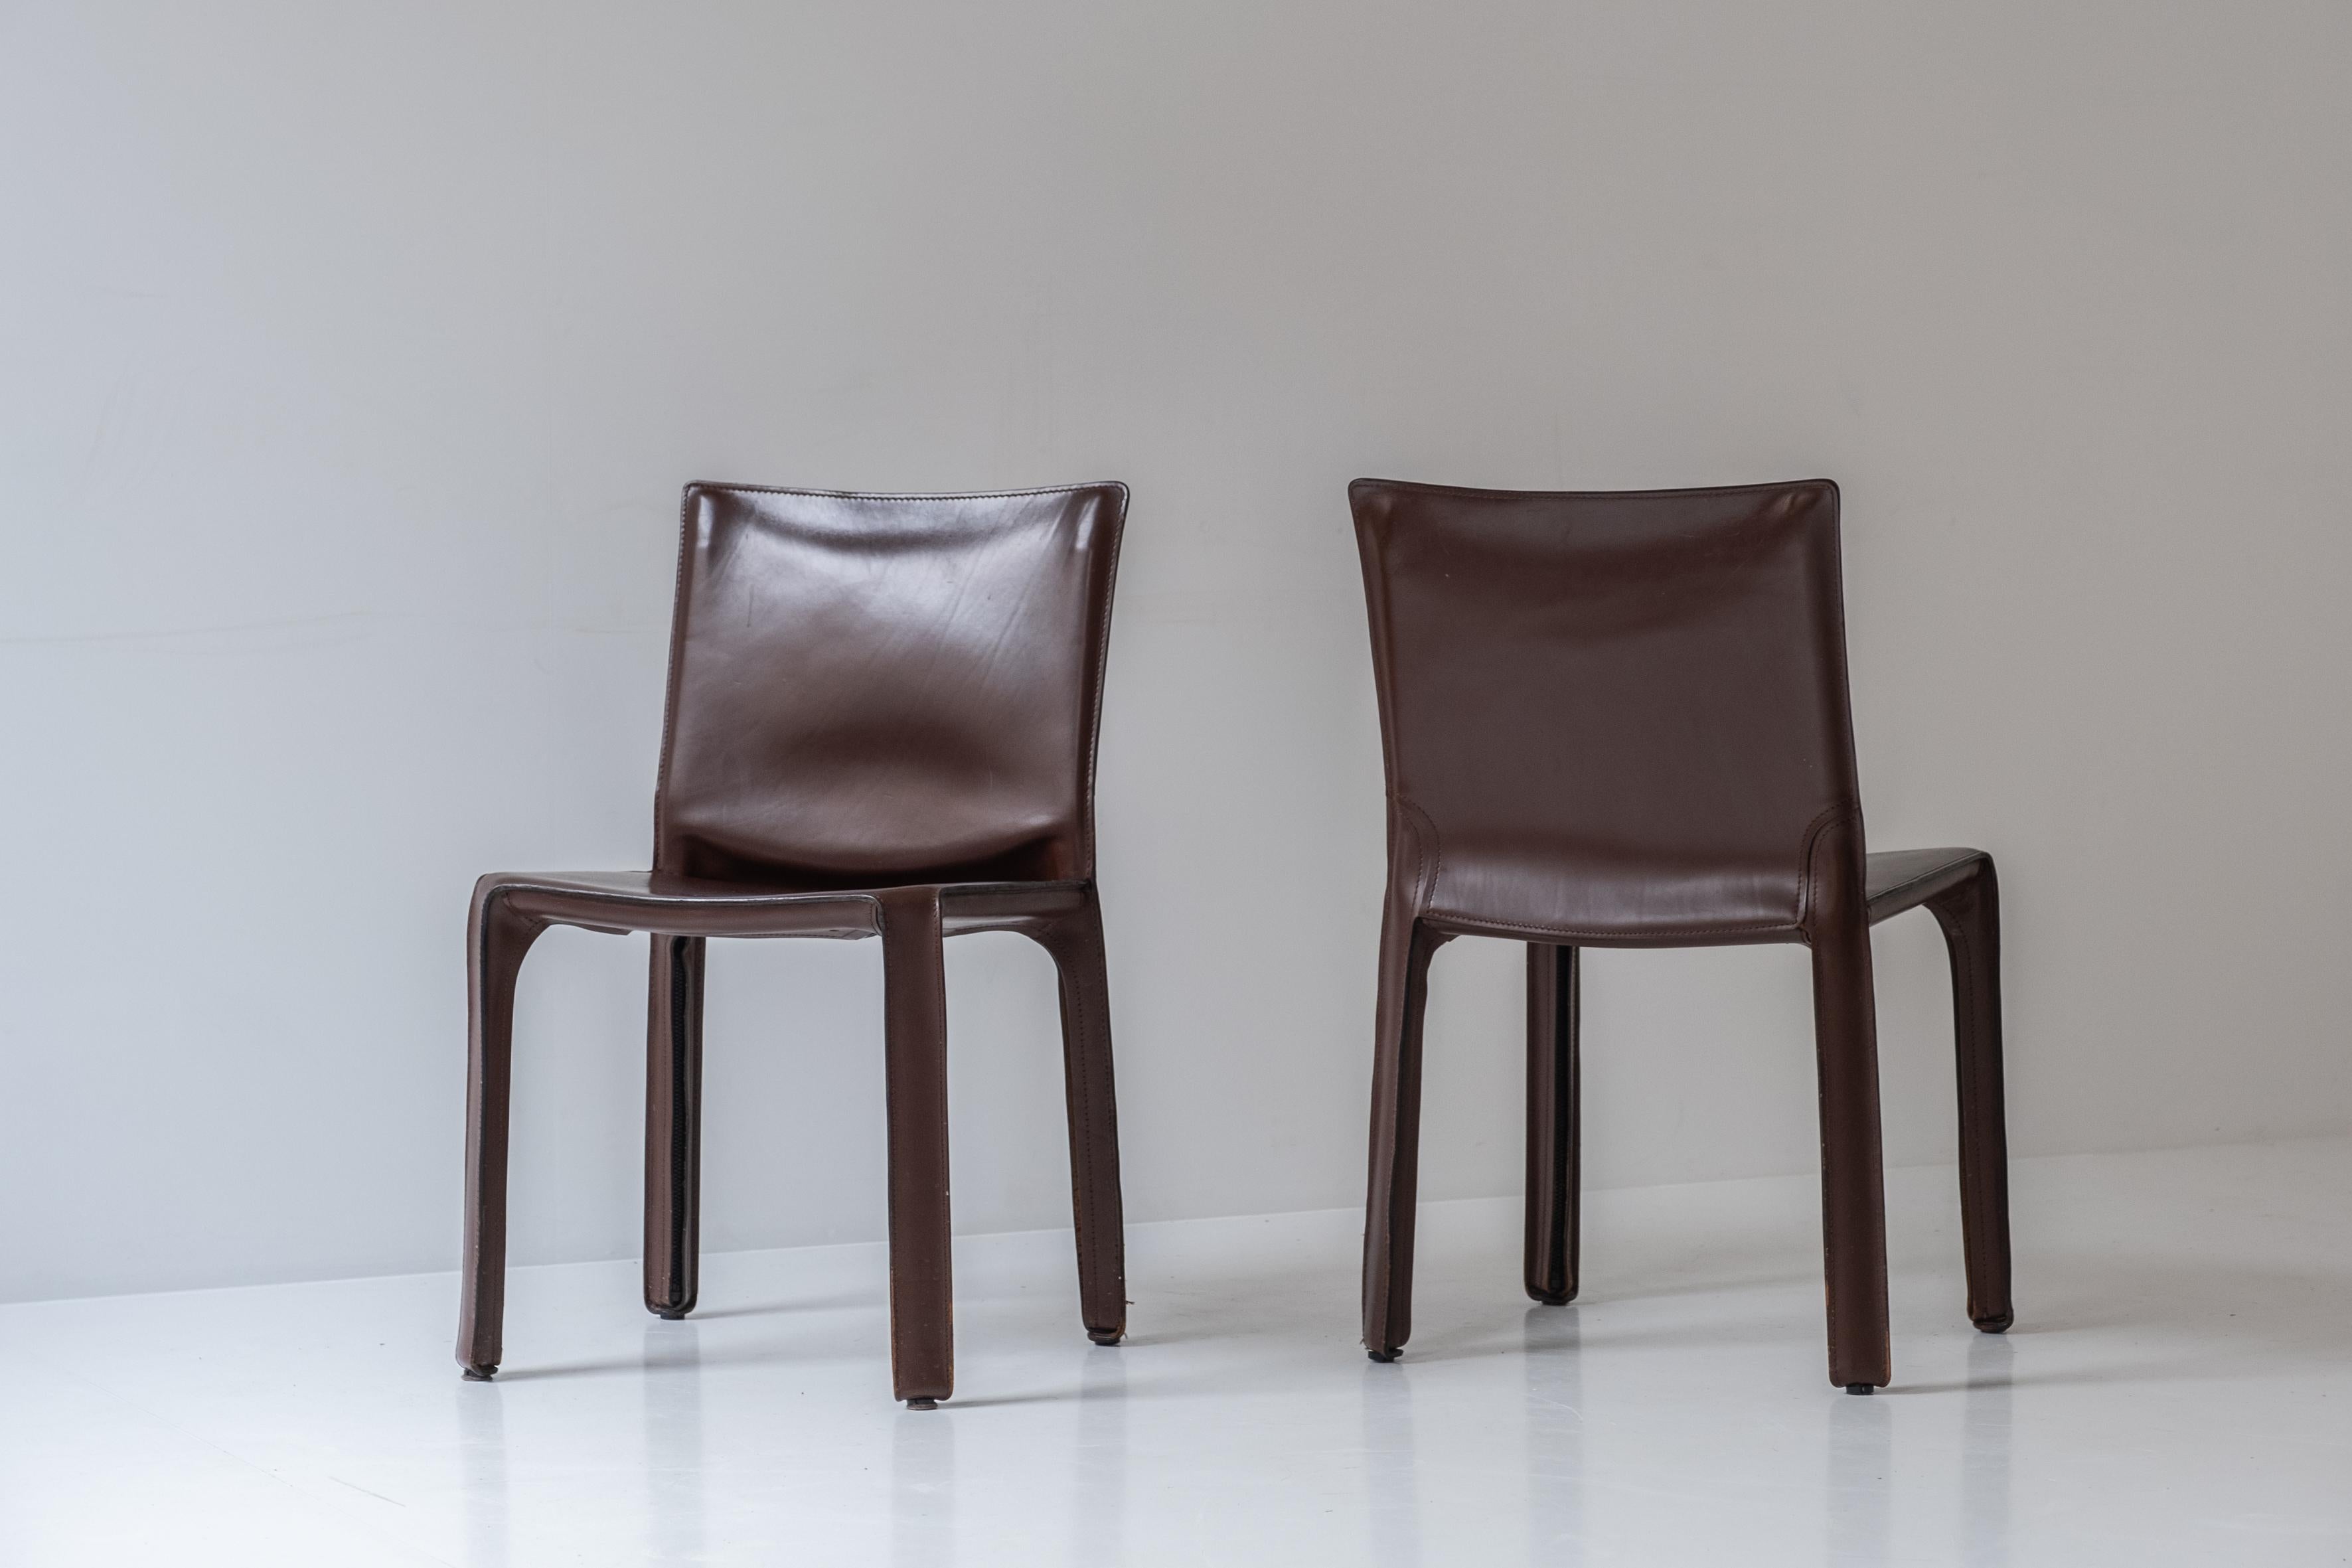 Set of 4 “413” Cab Chairs by Mario Bellini for Cassina, Italy, 1977 In Good Condition For Sale In Antwerp, BE